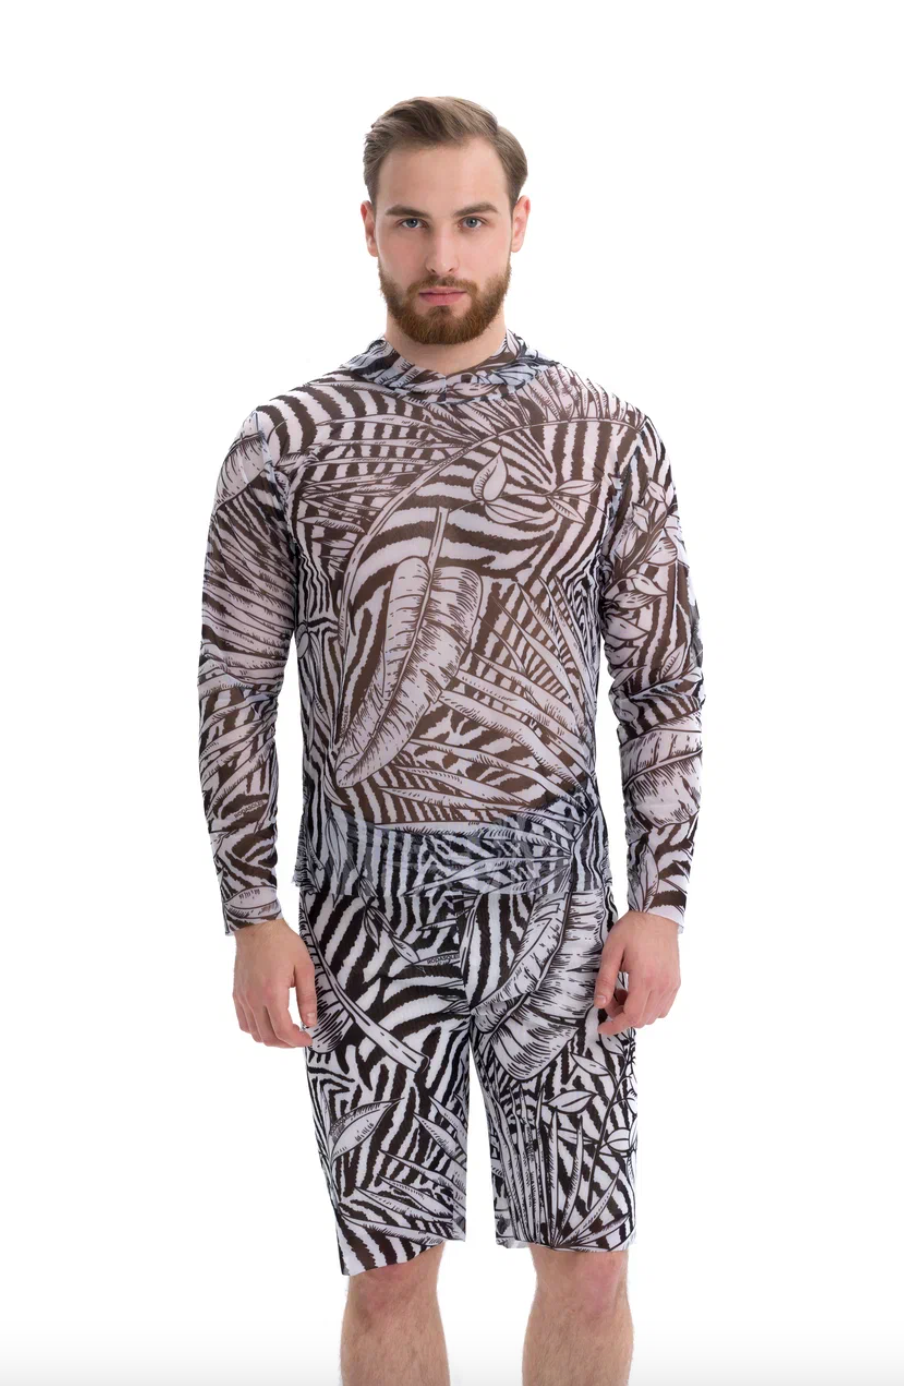 Explore our men's sustainable swimwear collection featuring a Zebra print beach t-shirt with a hood and SPF35 protection. Enjoy classic luxury, eco-friendly design, and superior sun protection. Shop now!